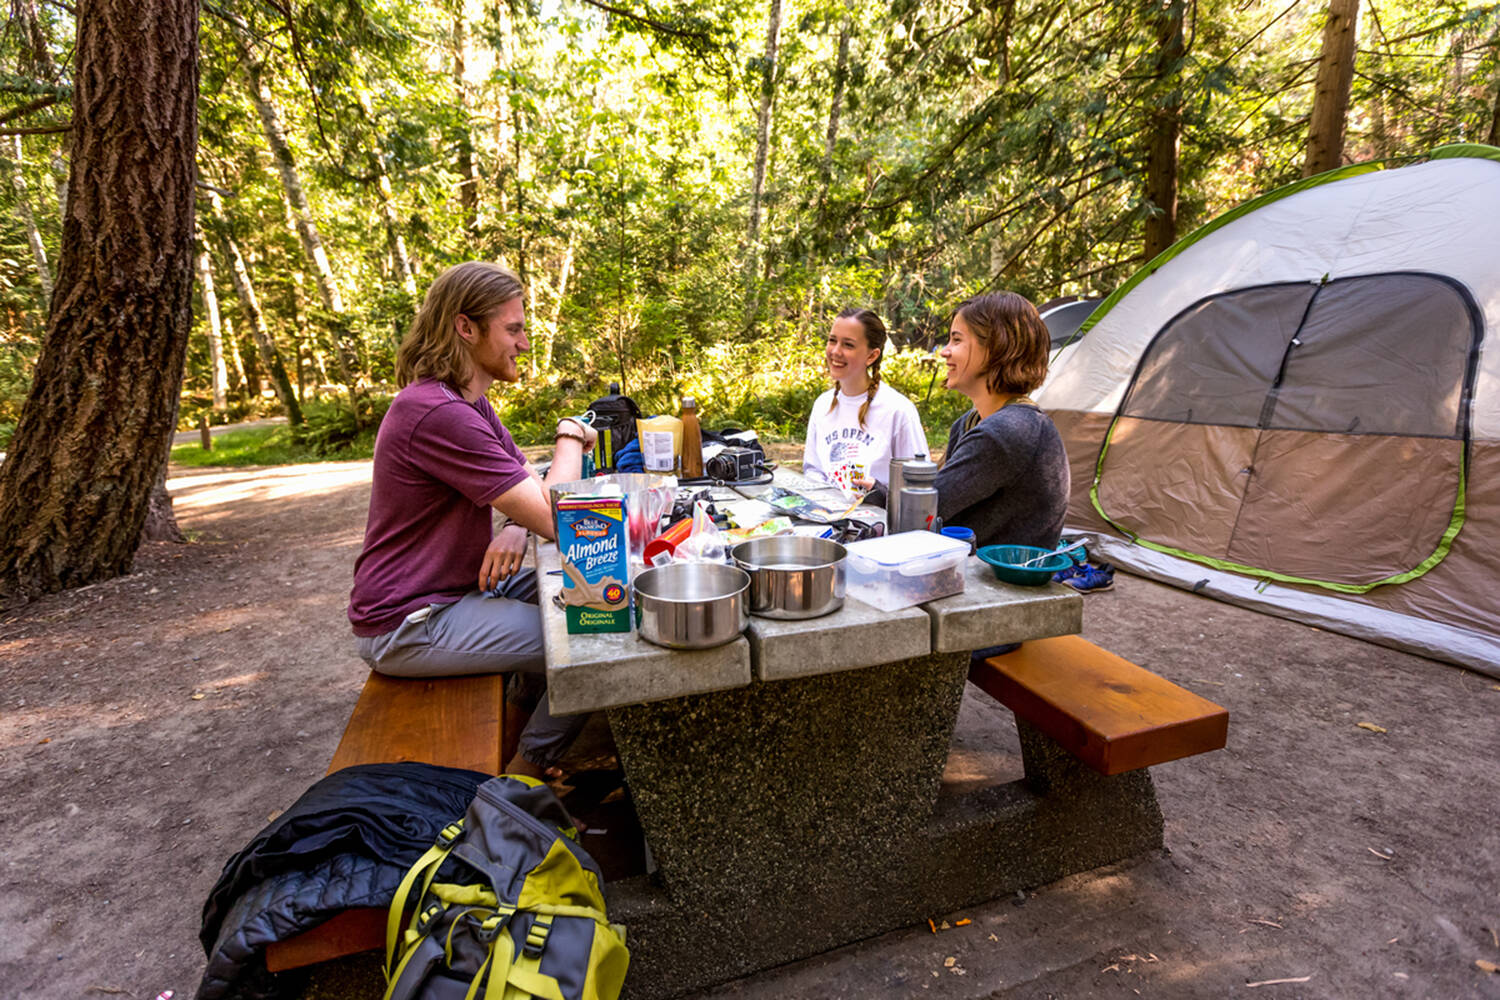 SMONECTEN (McDonald) Campground in North Saanich. (File photo courtesy of Parks Canada)